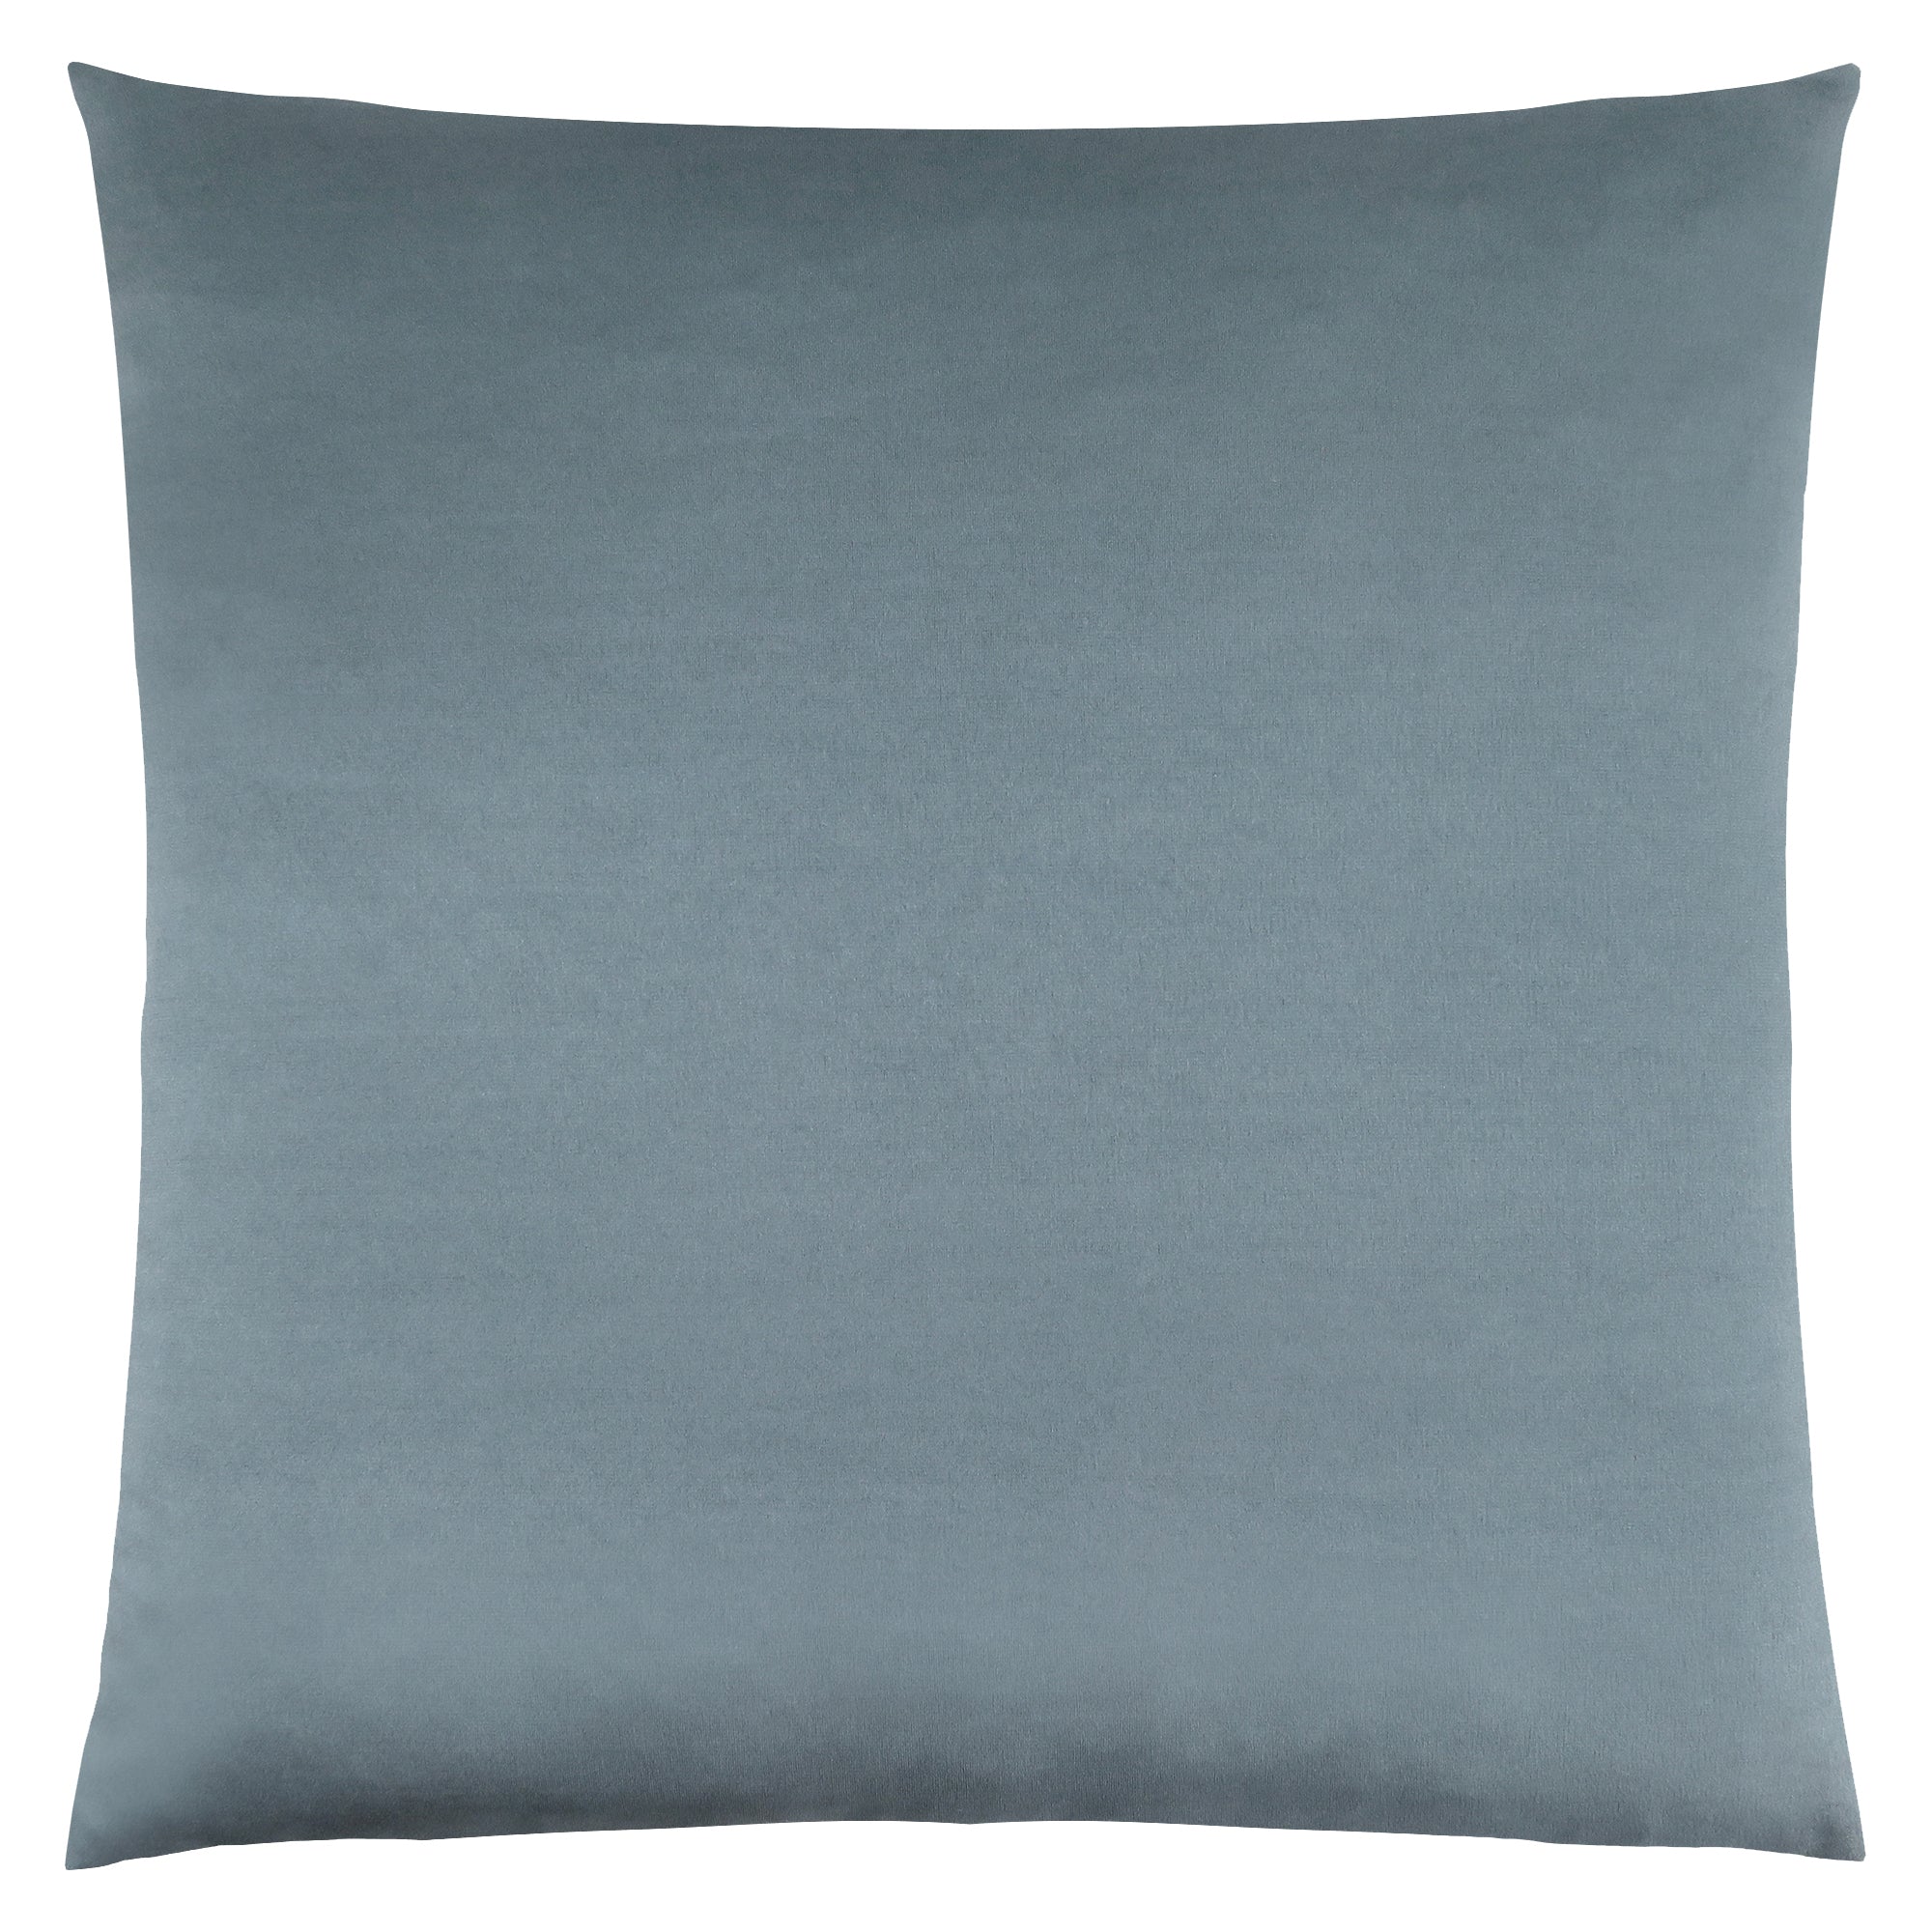 MN-849342    Pillows, 18 X 18 Square, Insert Included, Decorative Throw, Accent, Sofa, Couch, Bed, Satin-Look Polyester Fabric, Hypoallergenic Soft Polyester Insert, Pale Blue, Glam